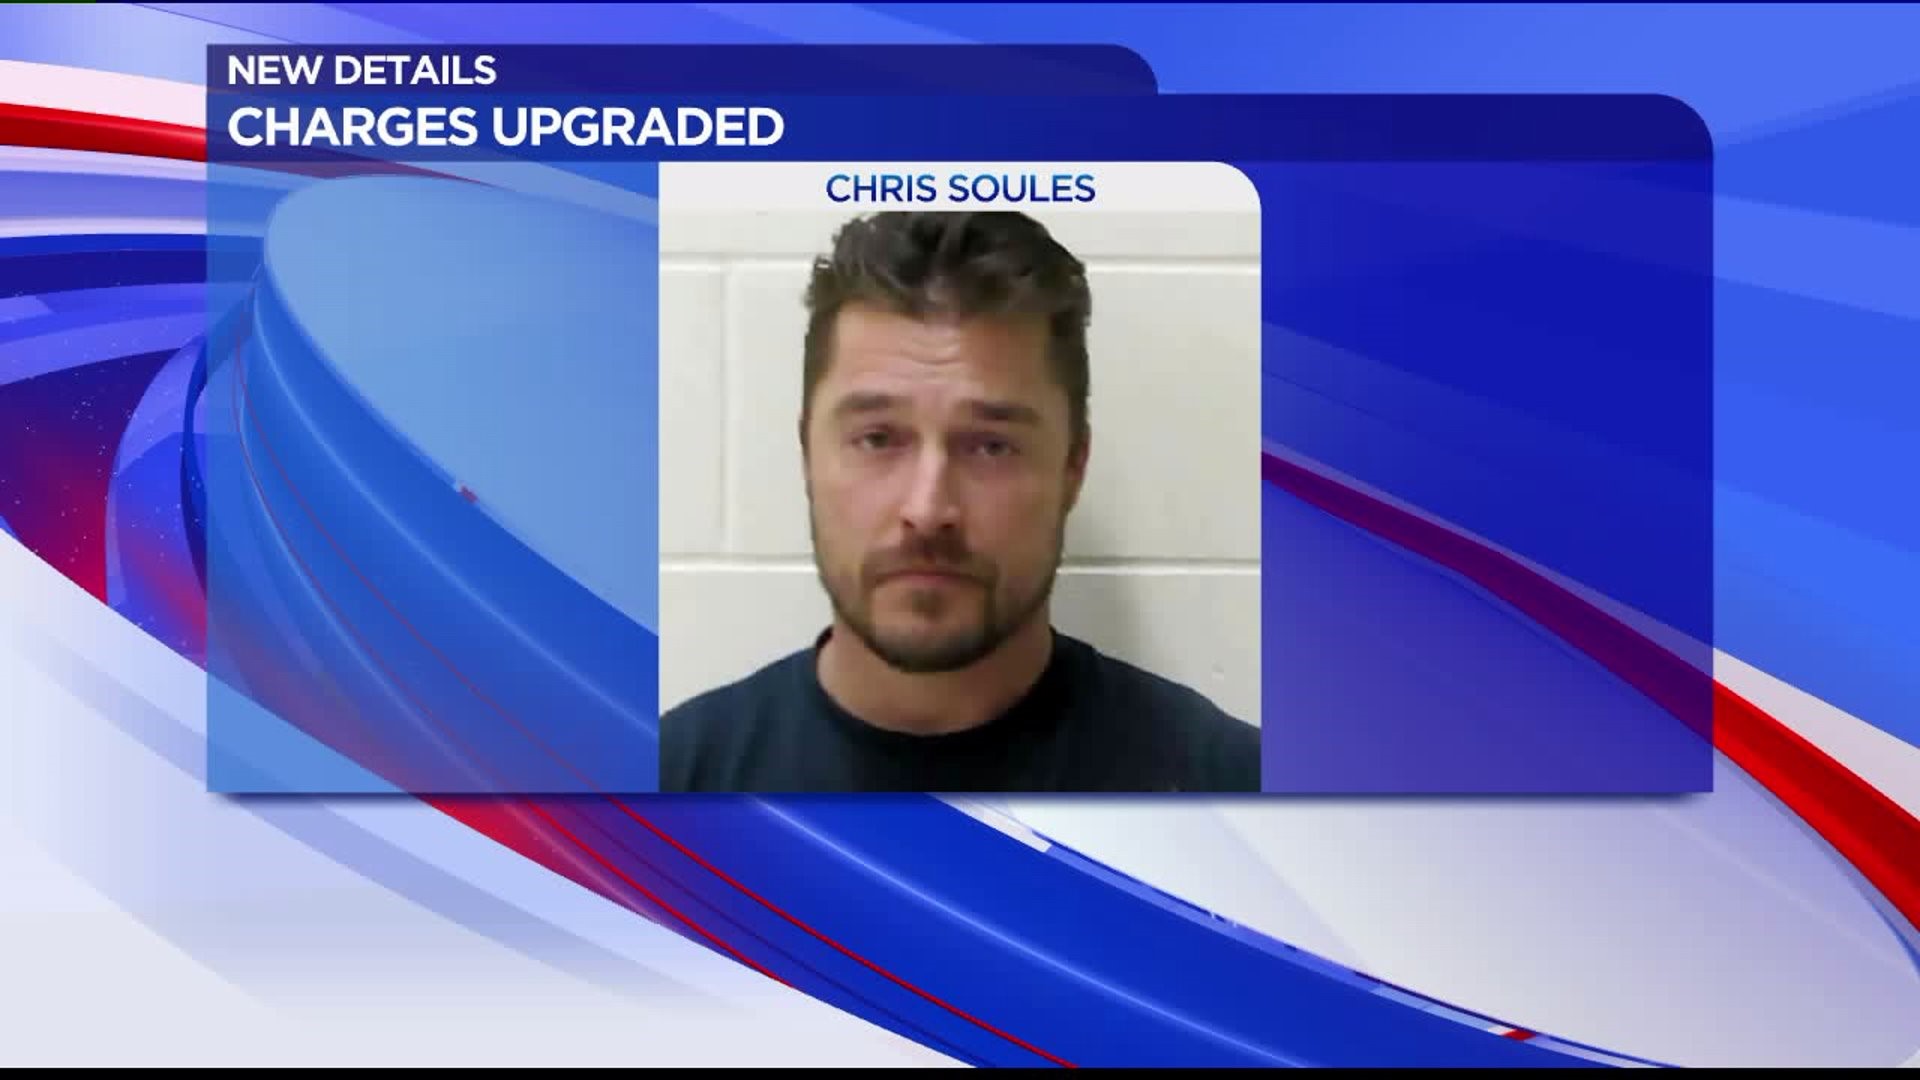 Chris Soules charges upgraded